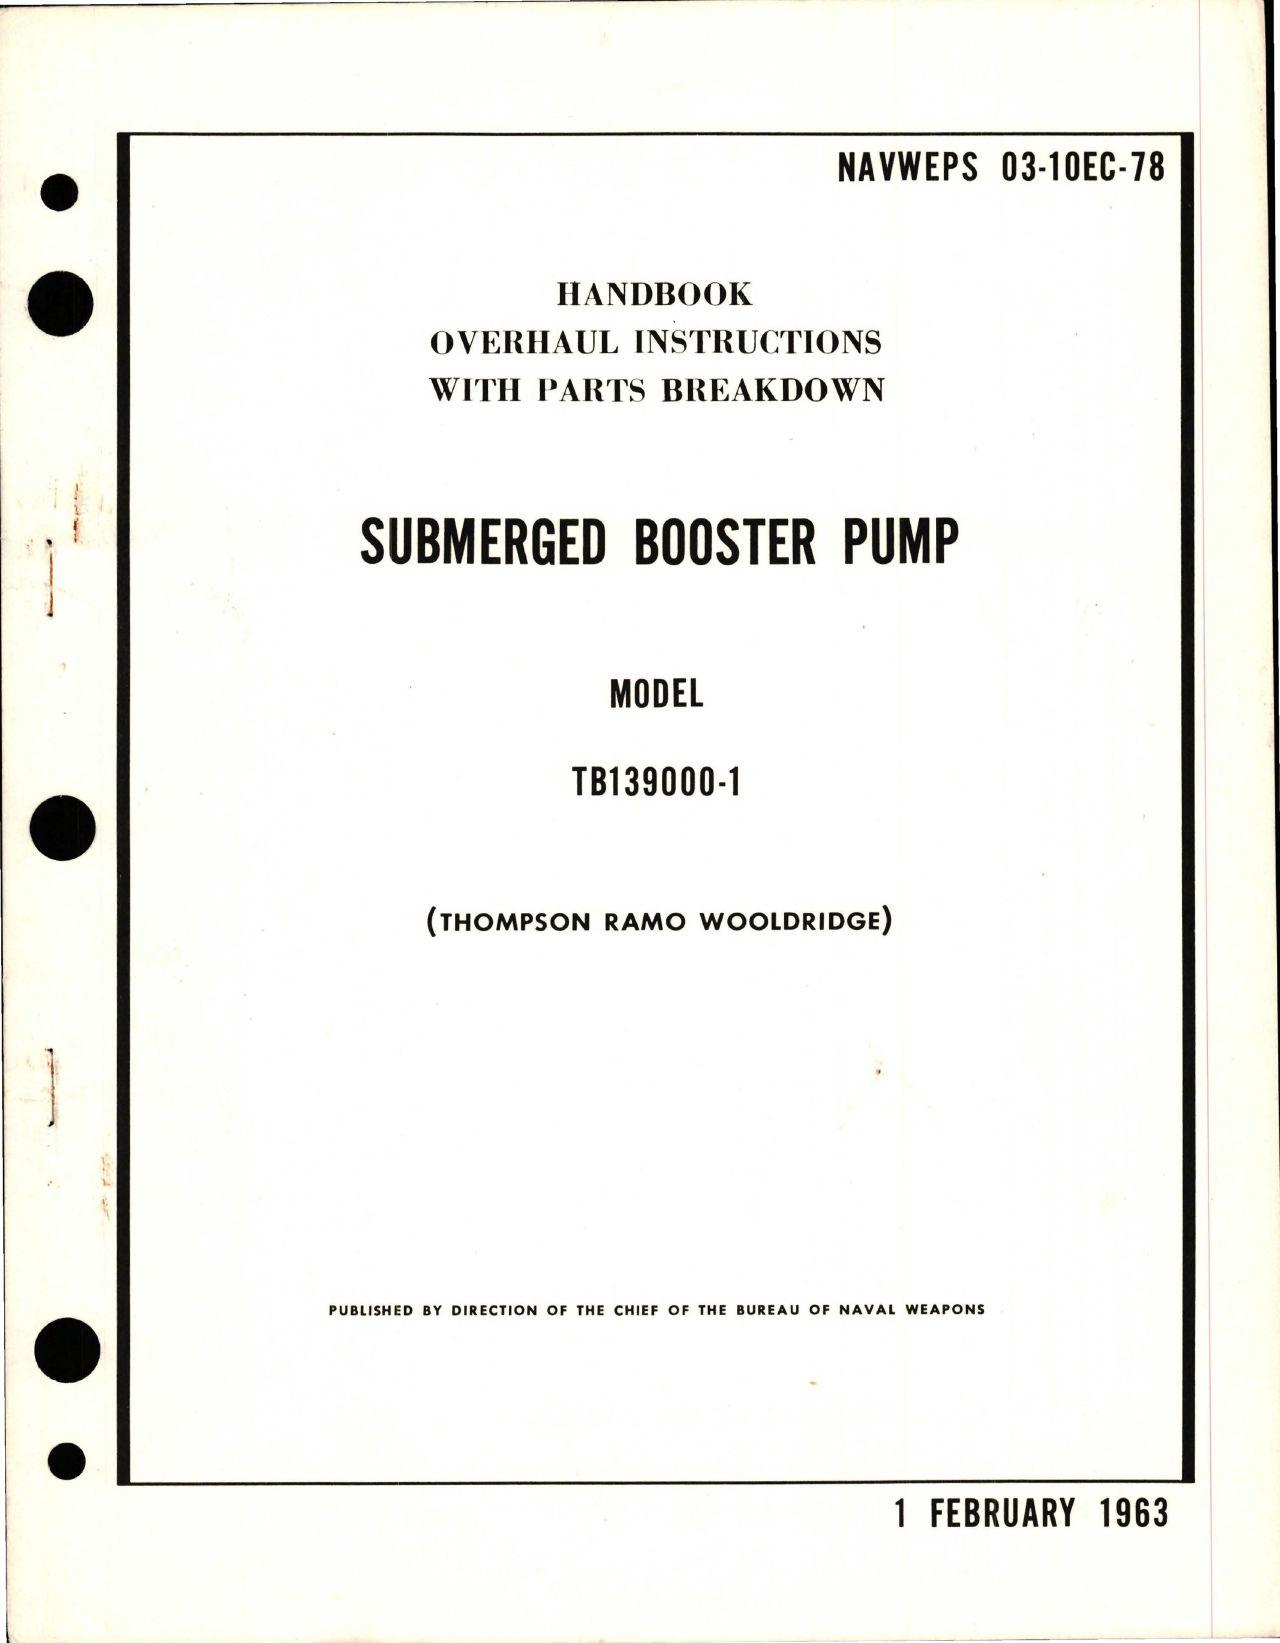 Sample page 1 from AirCorps Library document: Overhaul Instructions with Parts for Submerged Booster Pump - Model TB139000-1